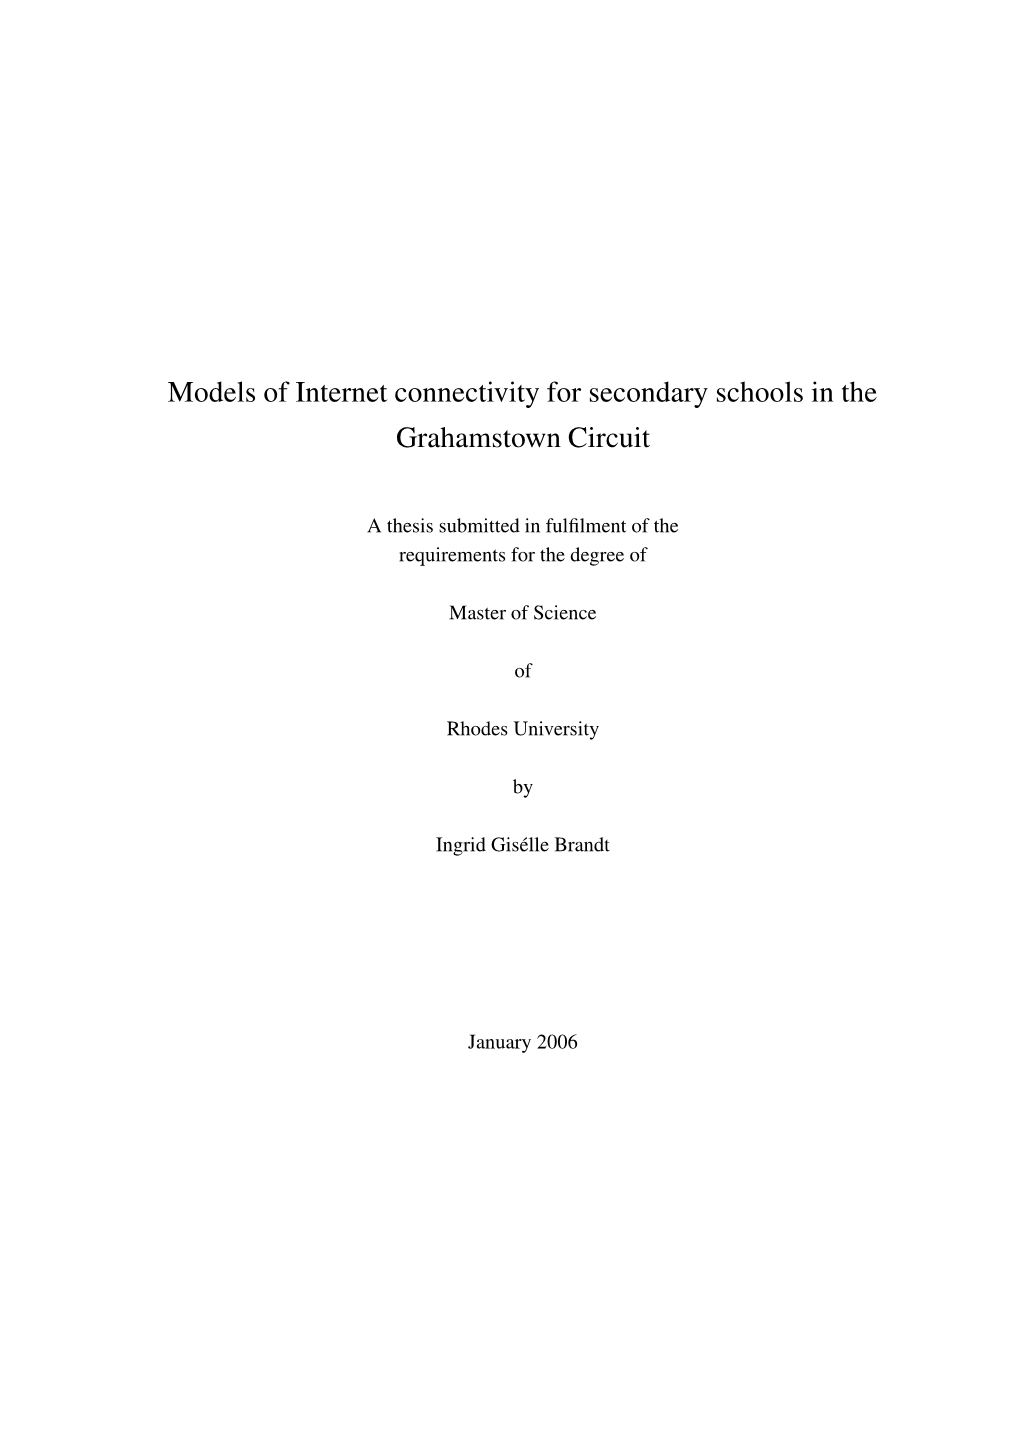 Models of Internet Connectivity for Secondary Schools in the Grahamstown Circuit